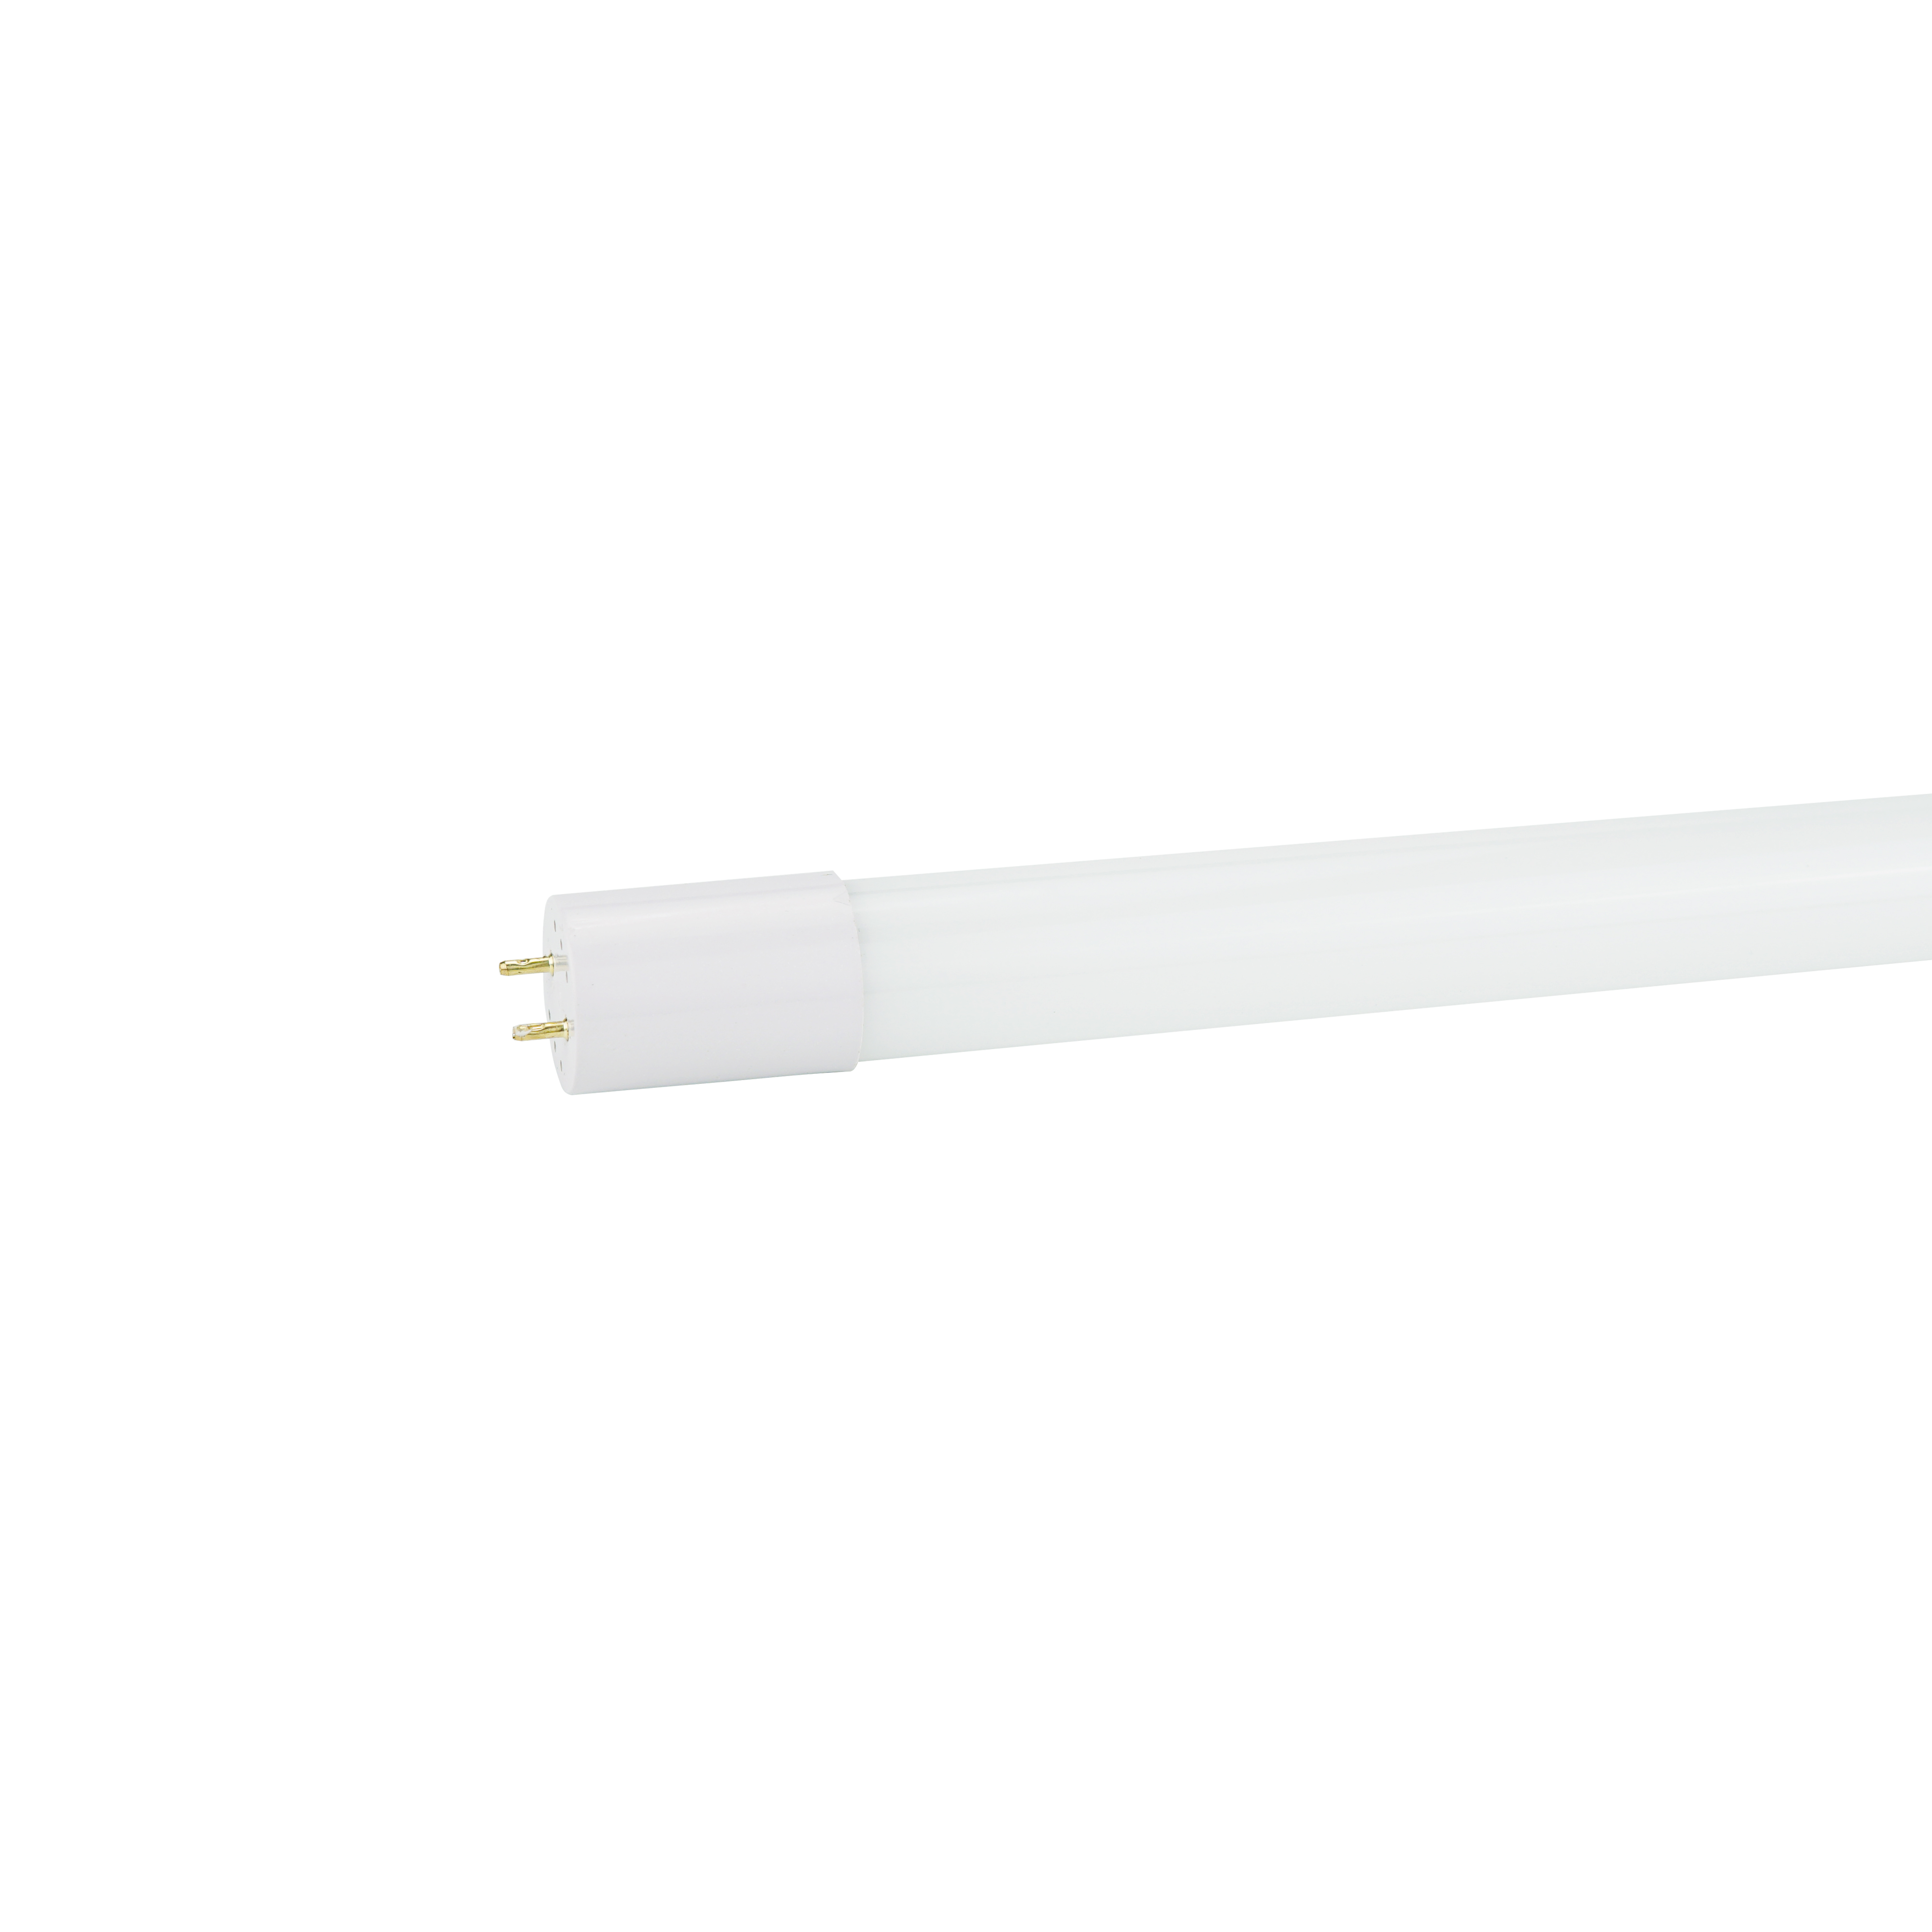 LED tube lights: Everything you need to know